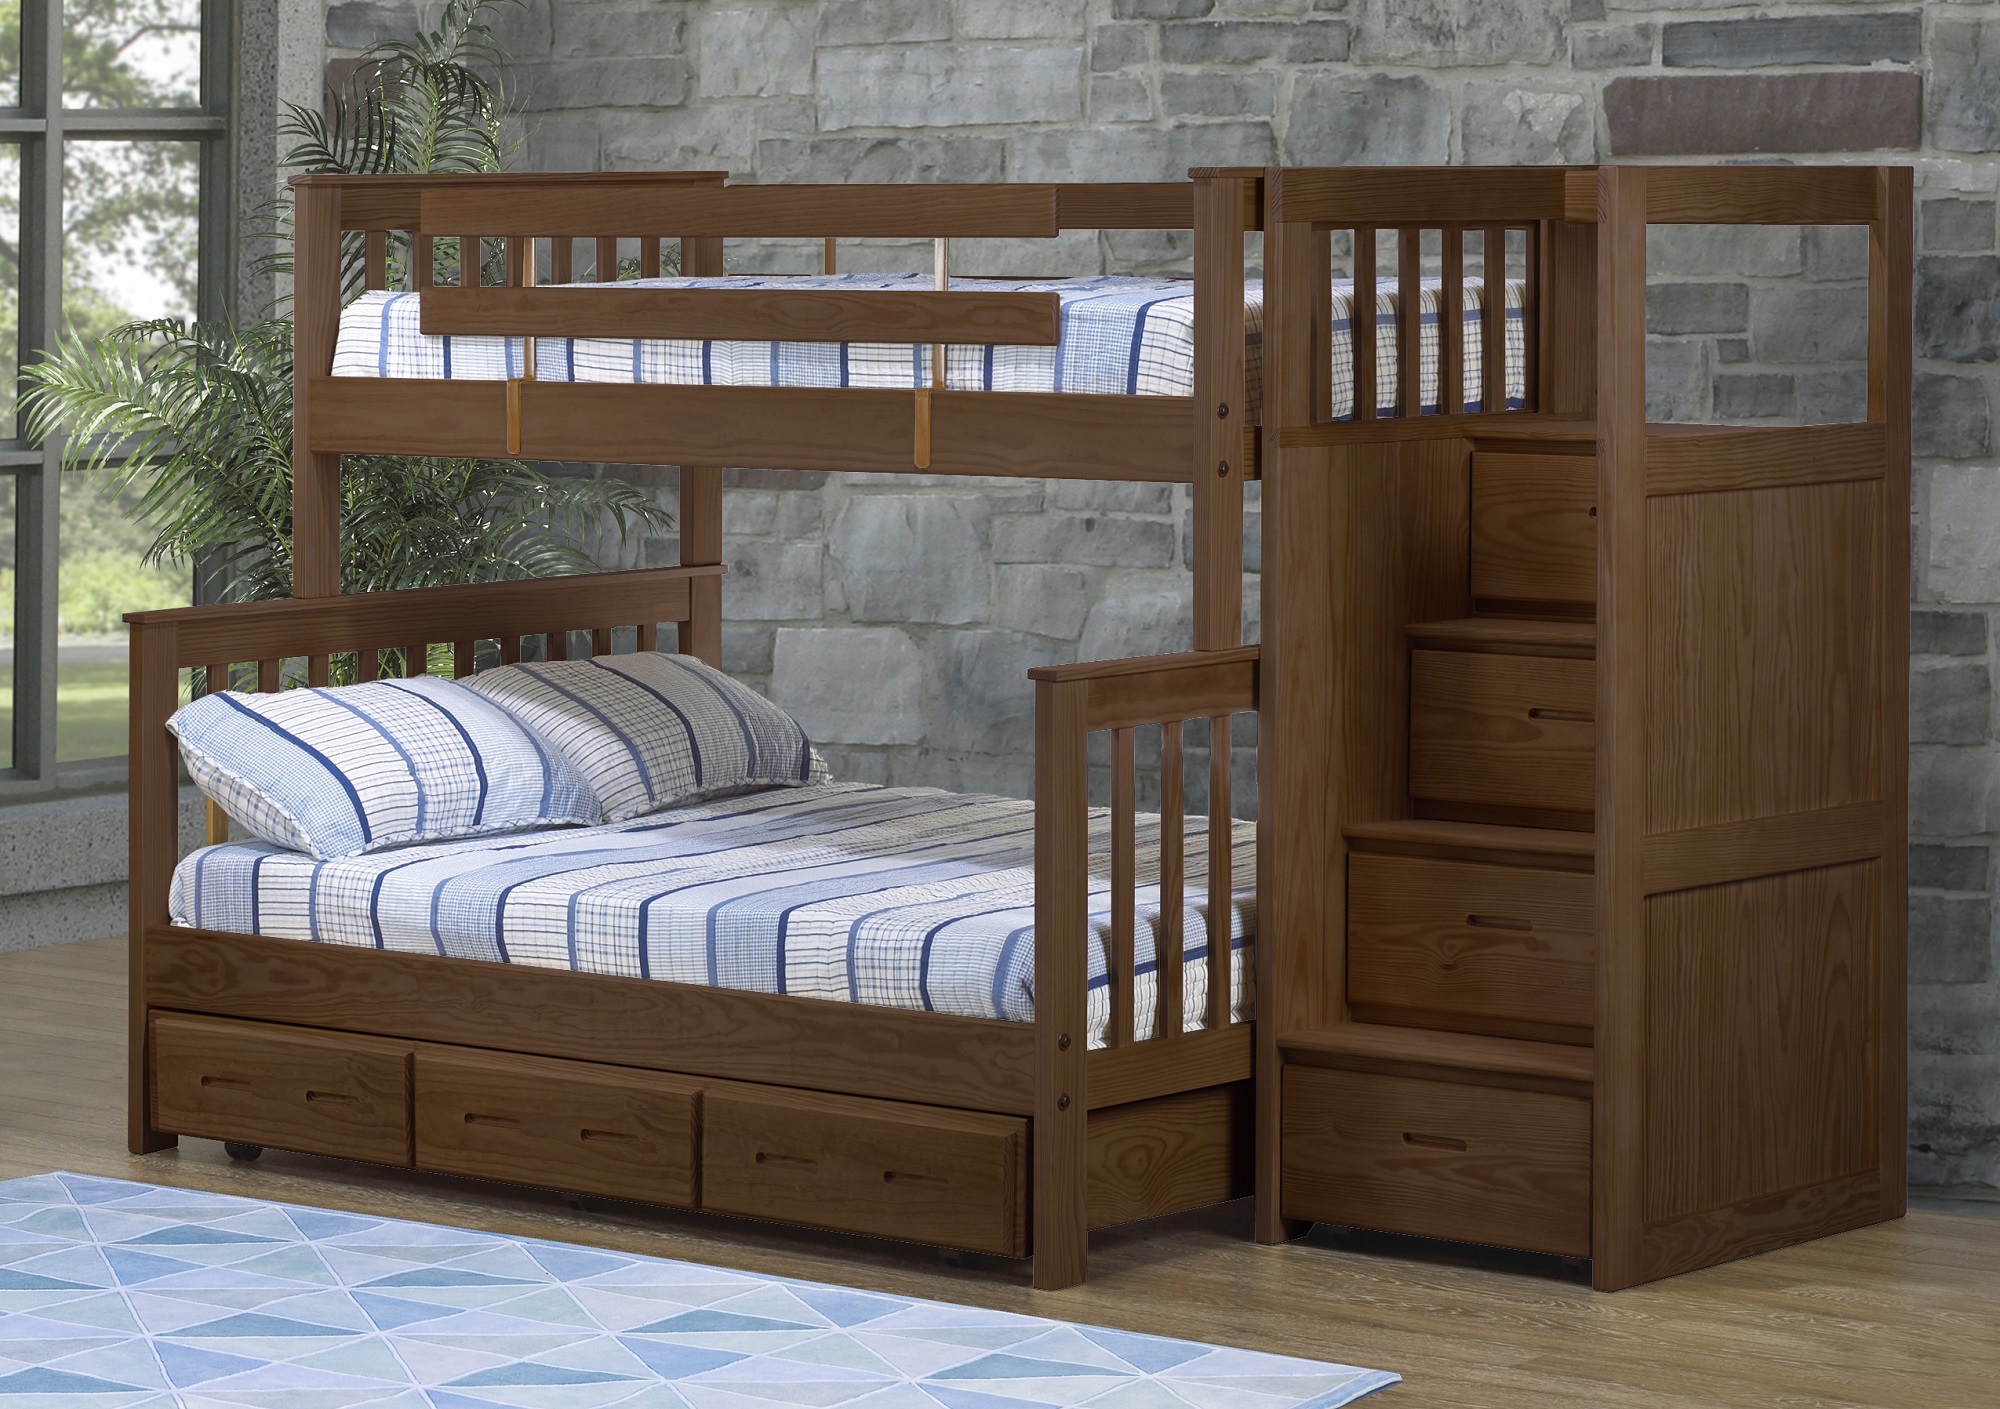 Bunkbed in Brindle Fiinish by Crate Designs